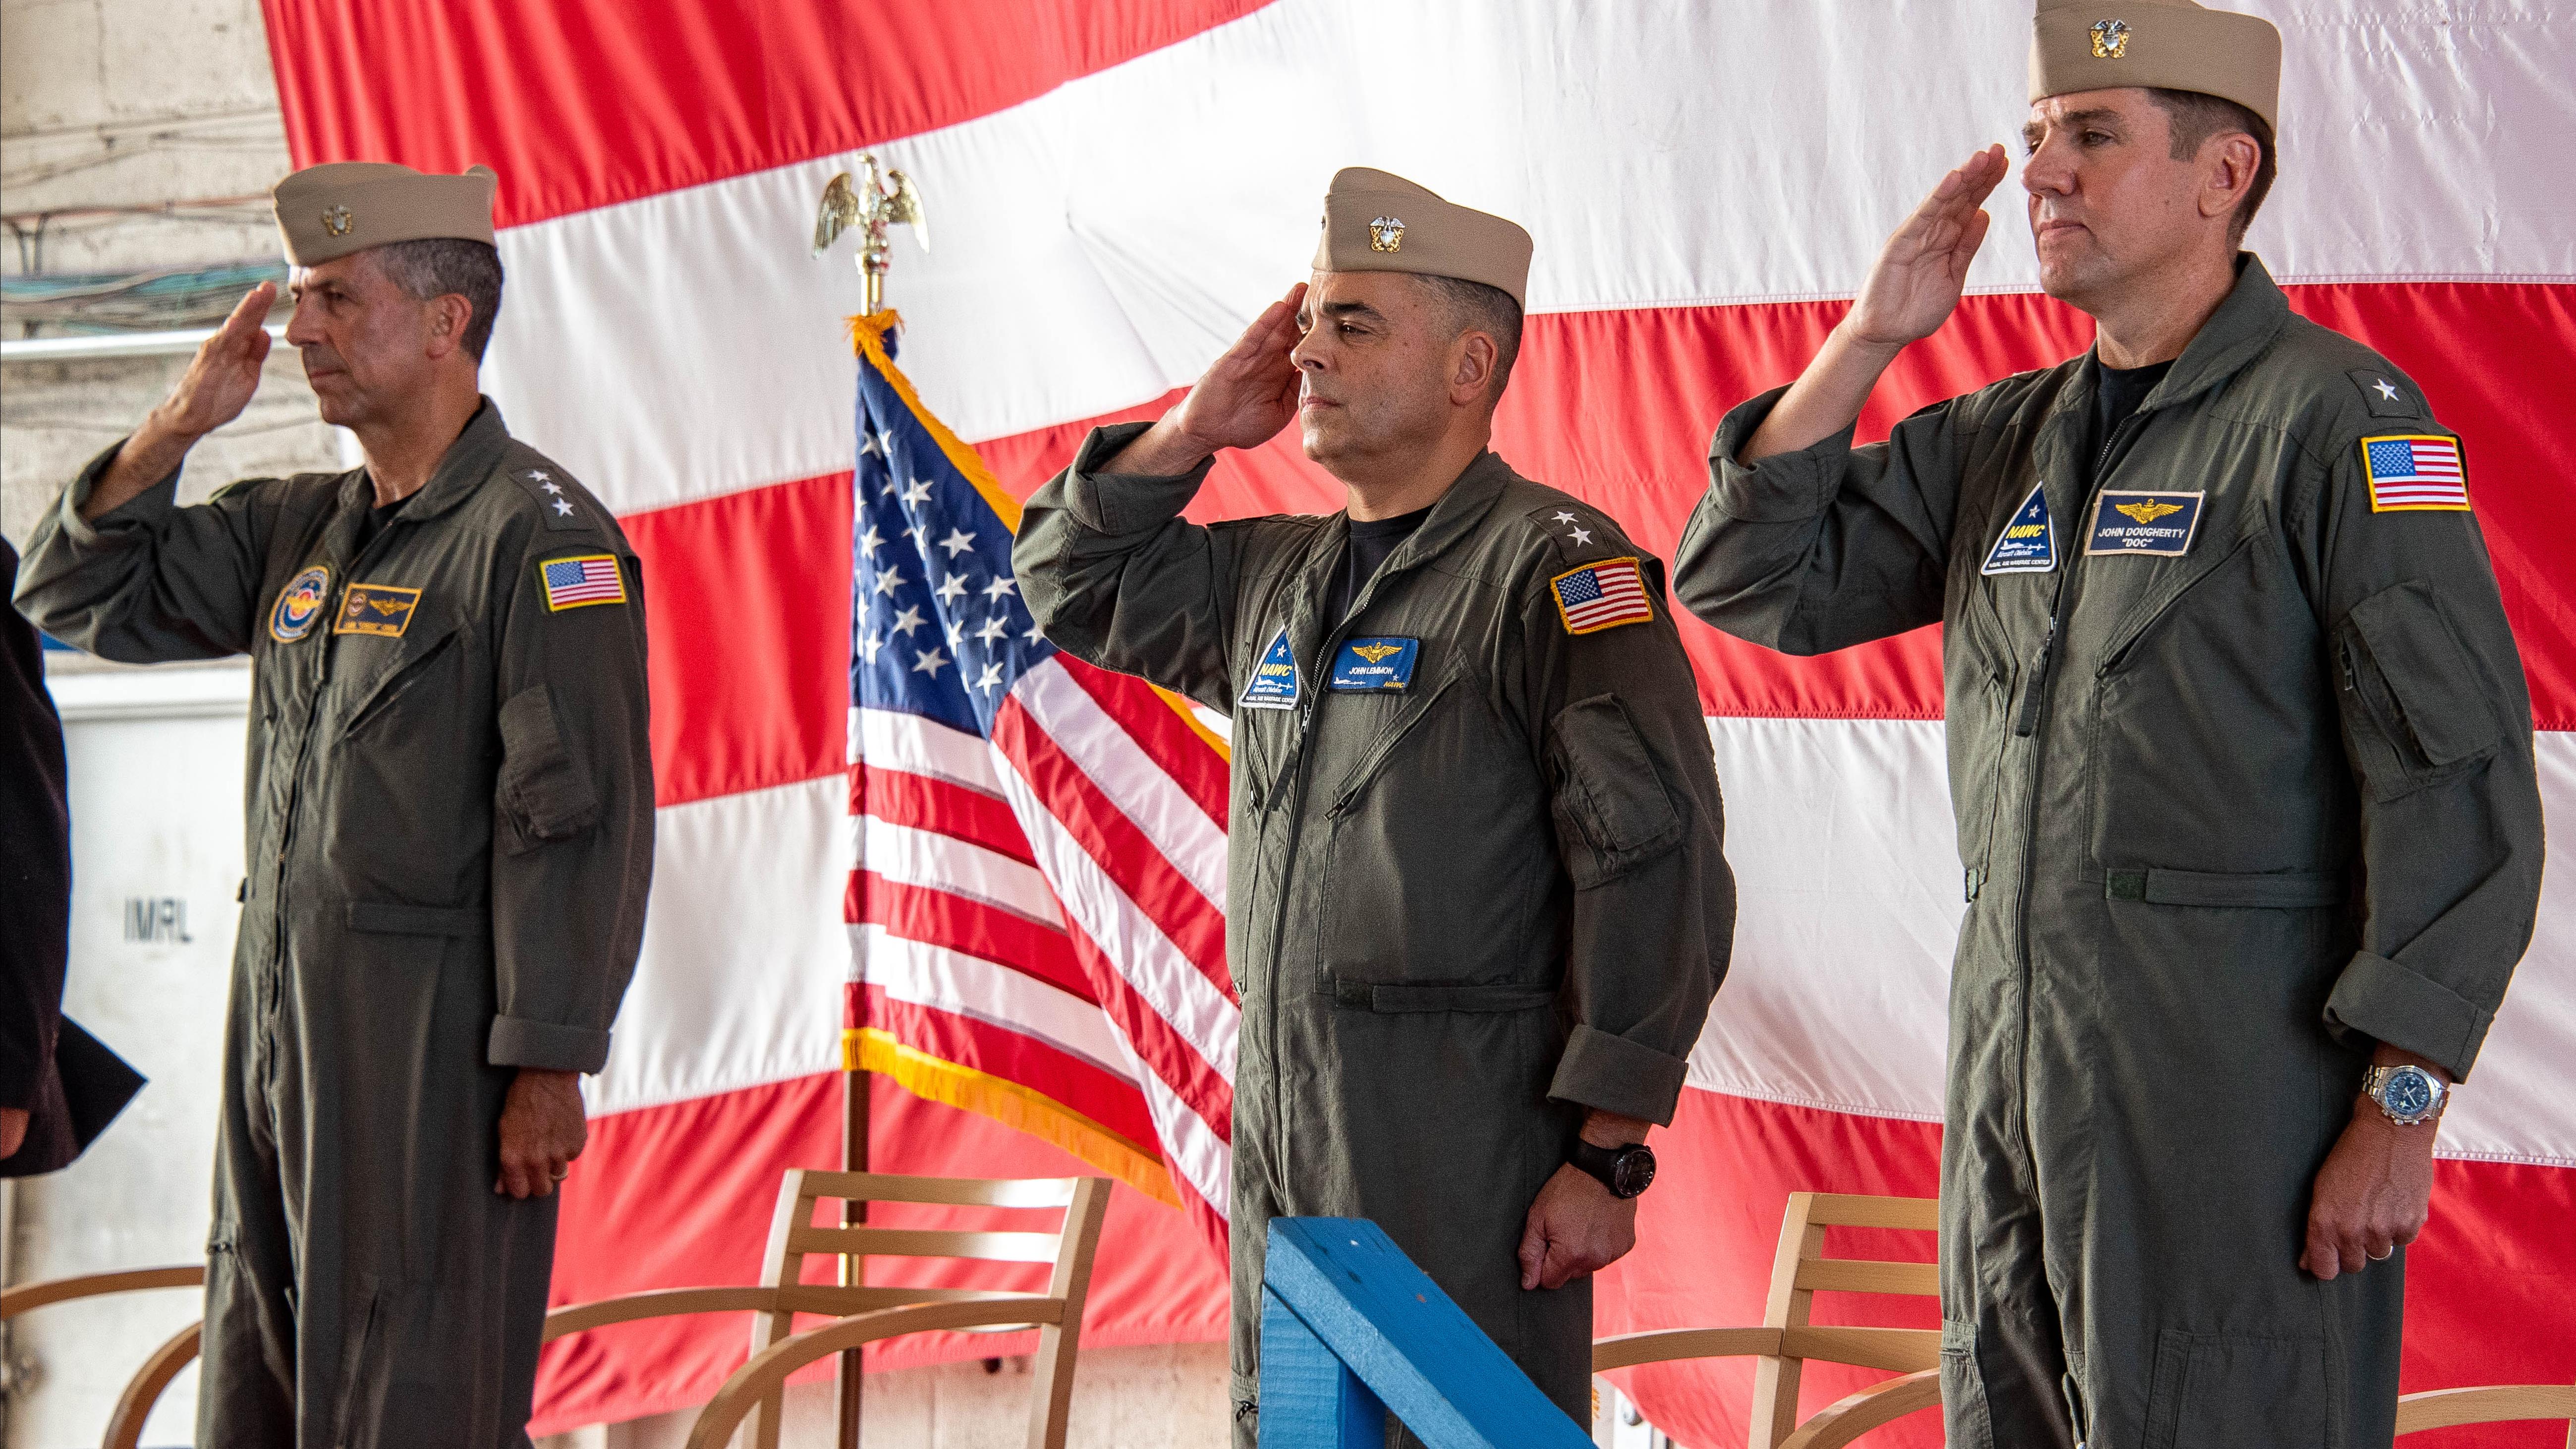 NAVAIR's Vice Adm. Carl Chebi, outgoing Rear Adm. John Lemmon, and incoming Rear Adm. John Dougherty IV salute in front of the American flag.